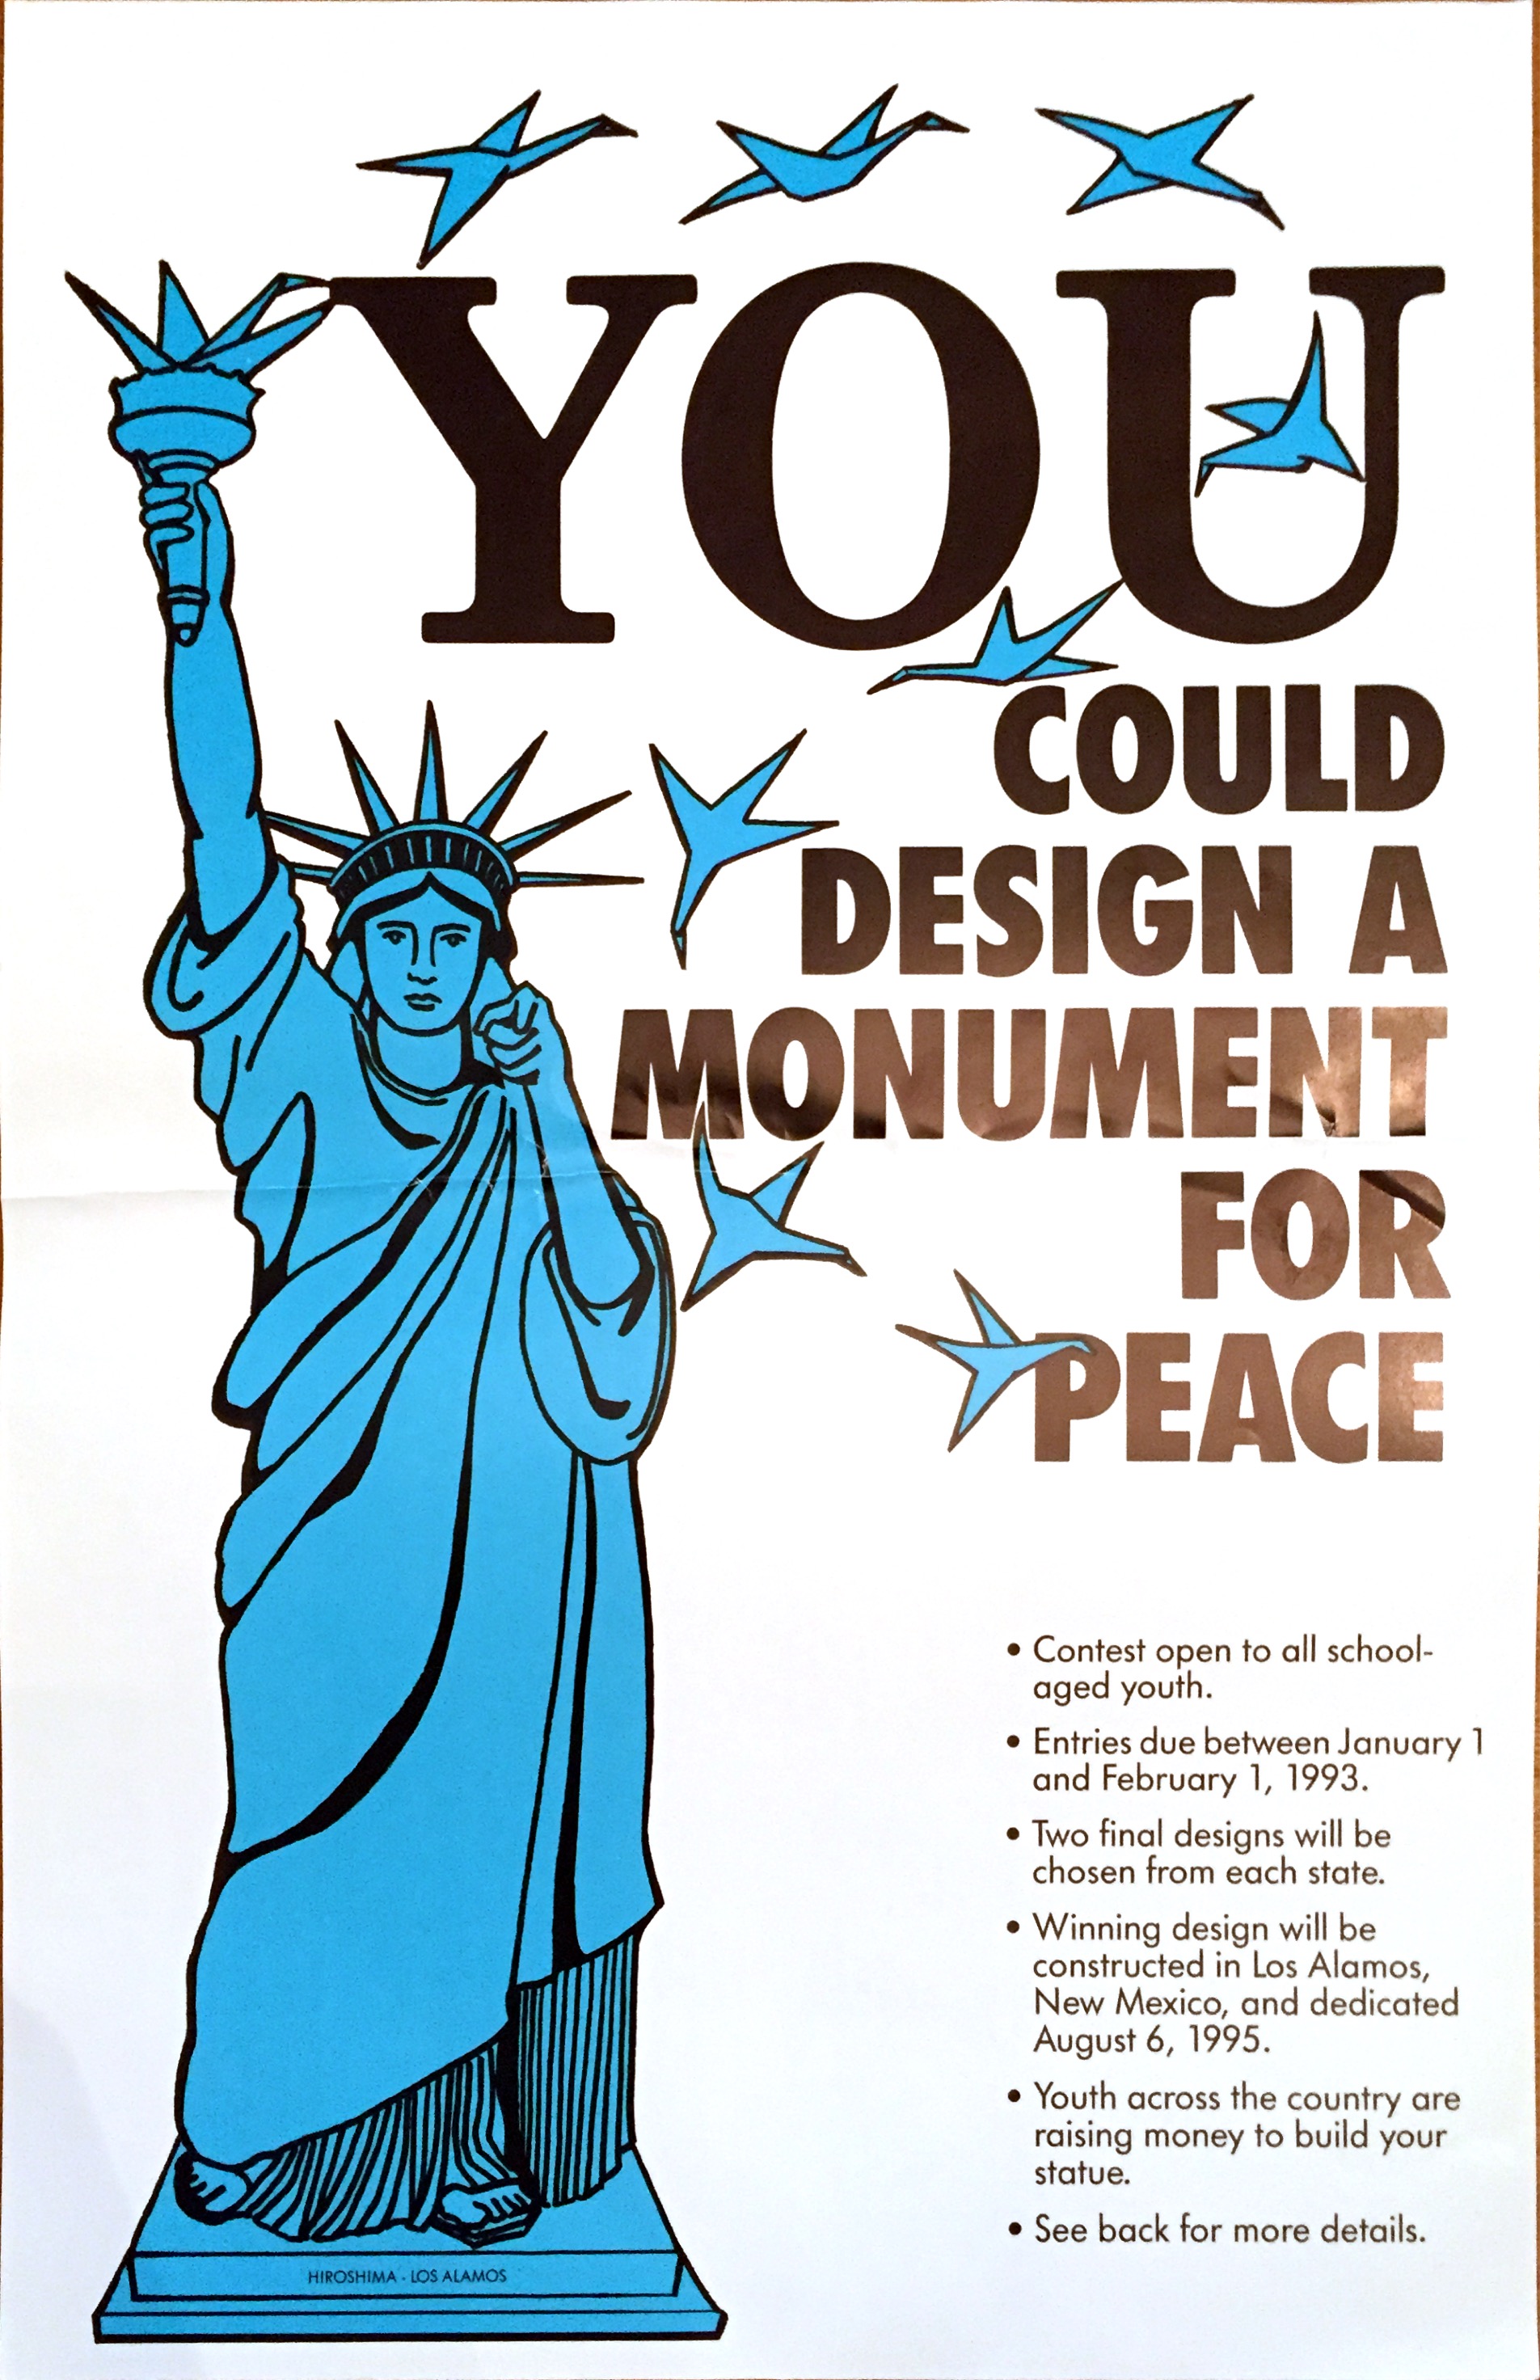 The Statue of Liberty points at viewer, under the large words 'YOU could design a monument for peace.' Folded peace cranes fly from the statue's torch.